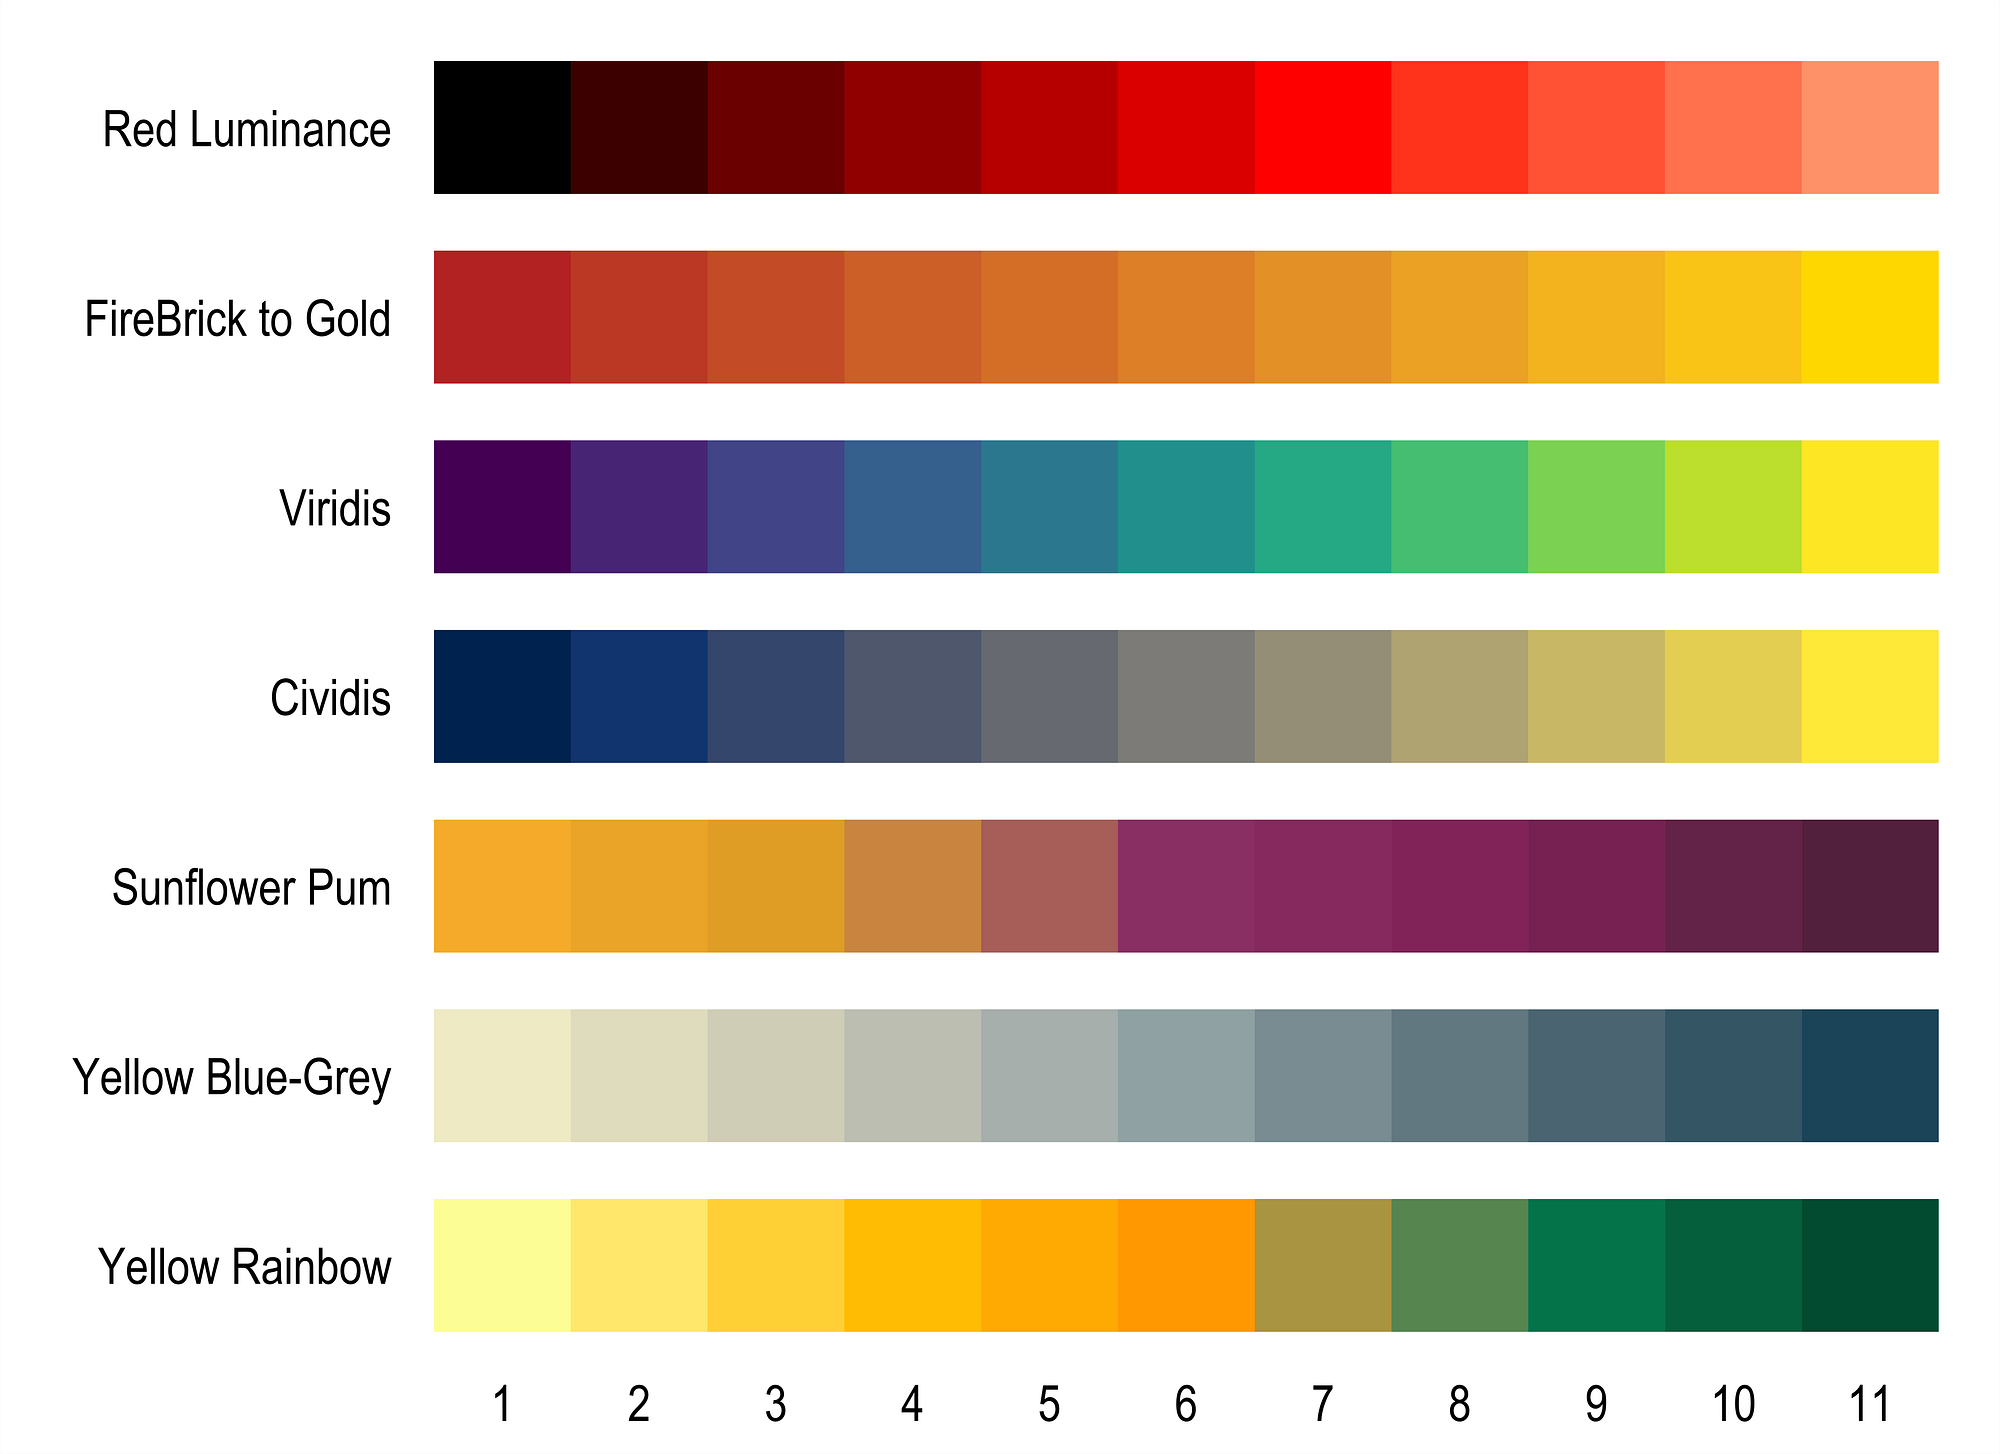 How to pick more beautiful colors for your data visualizations